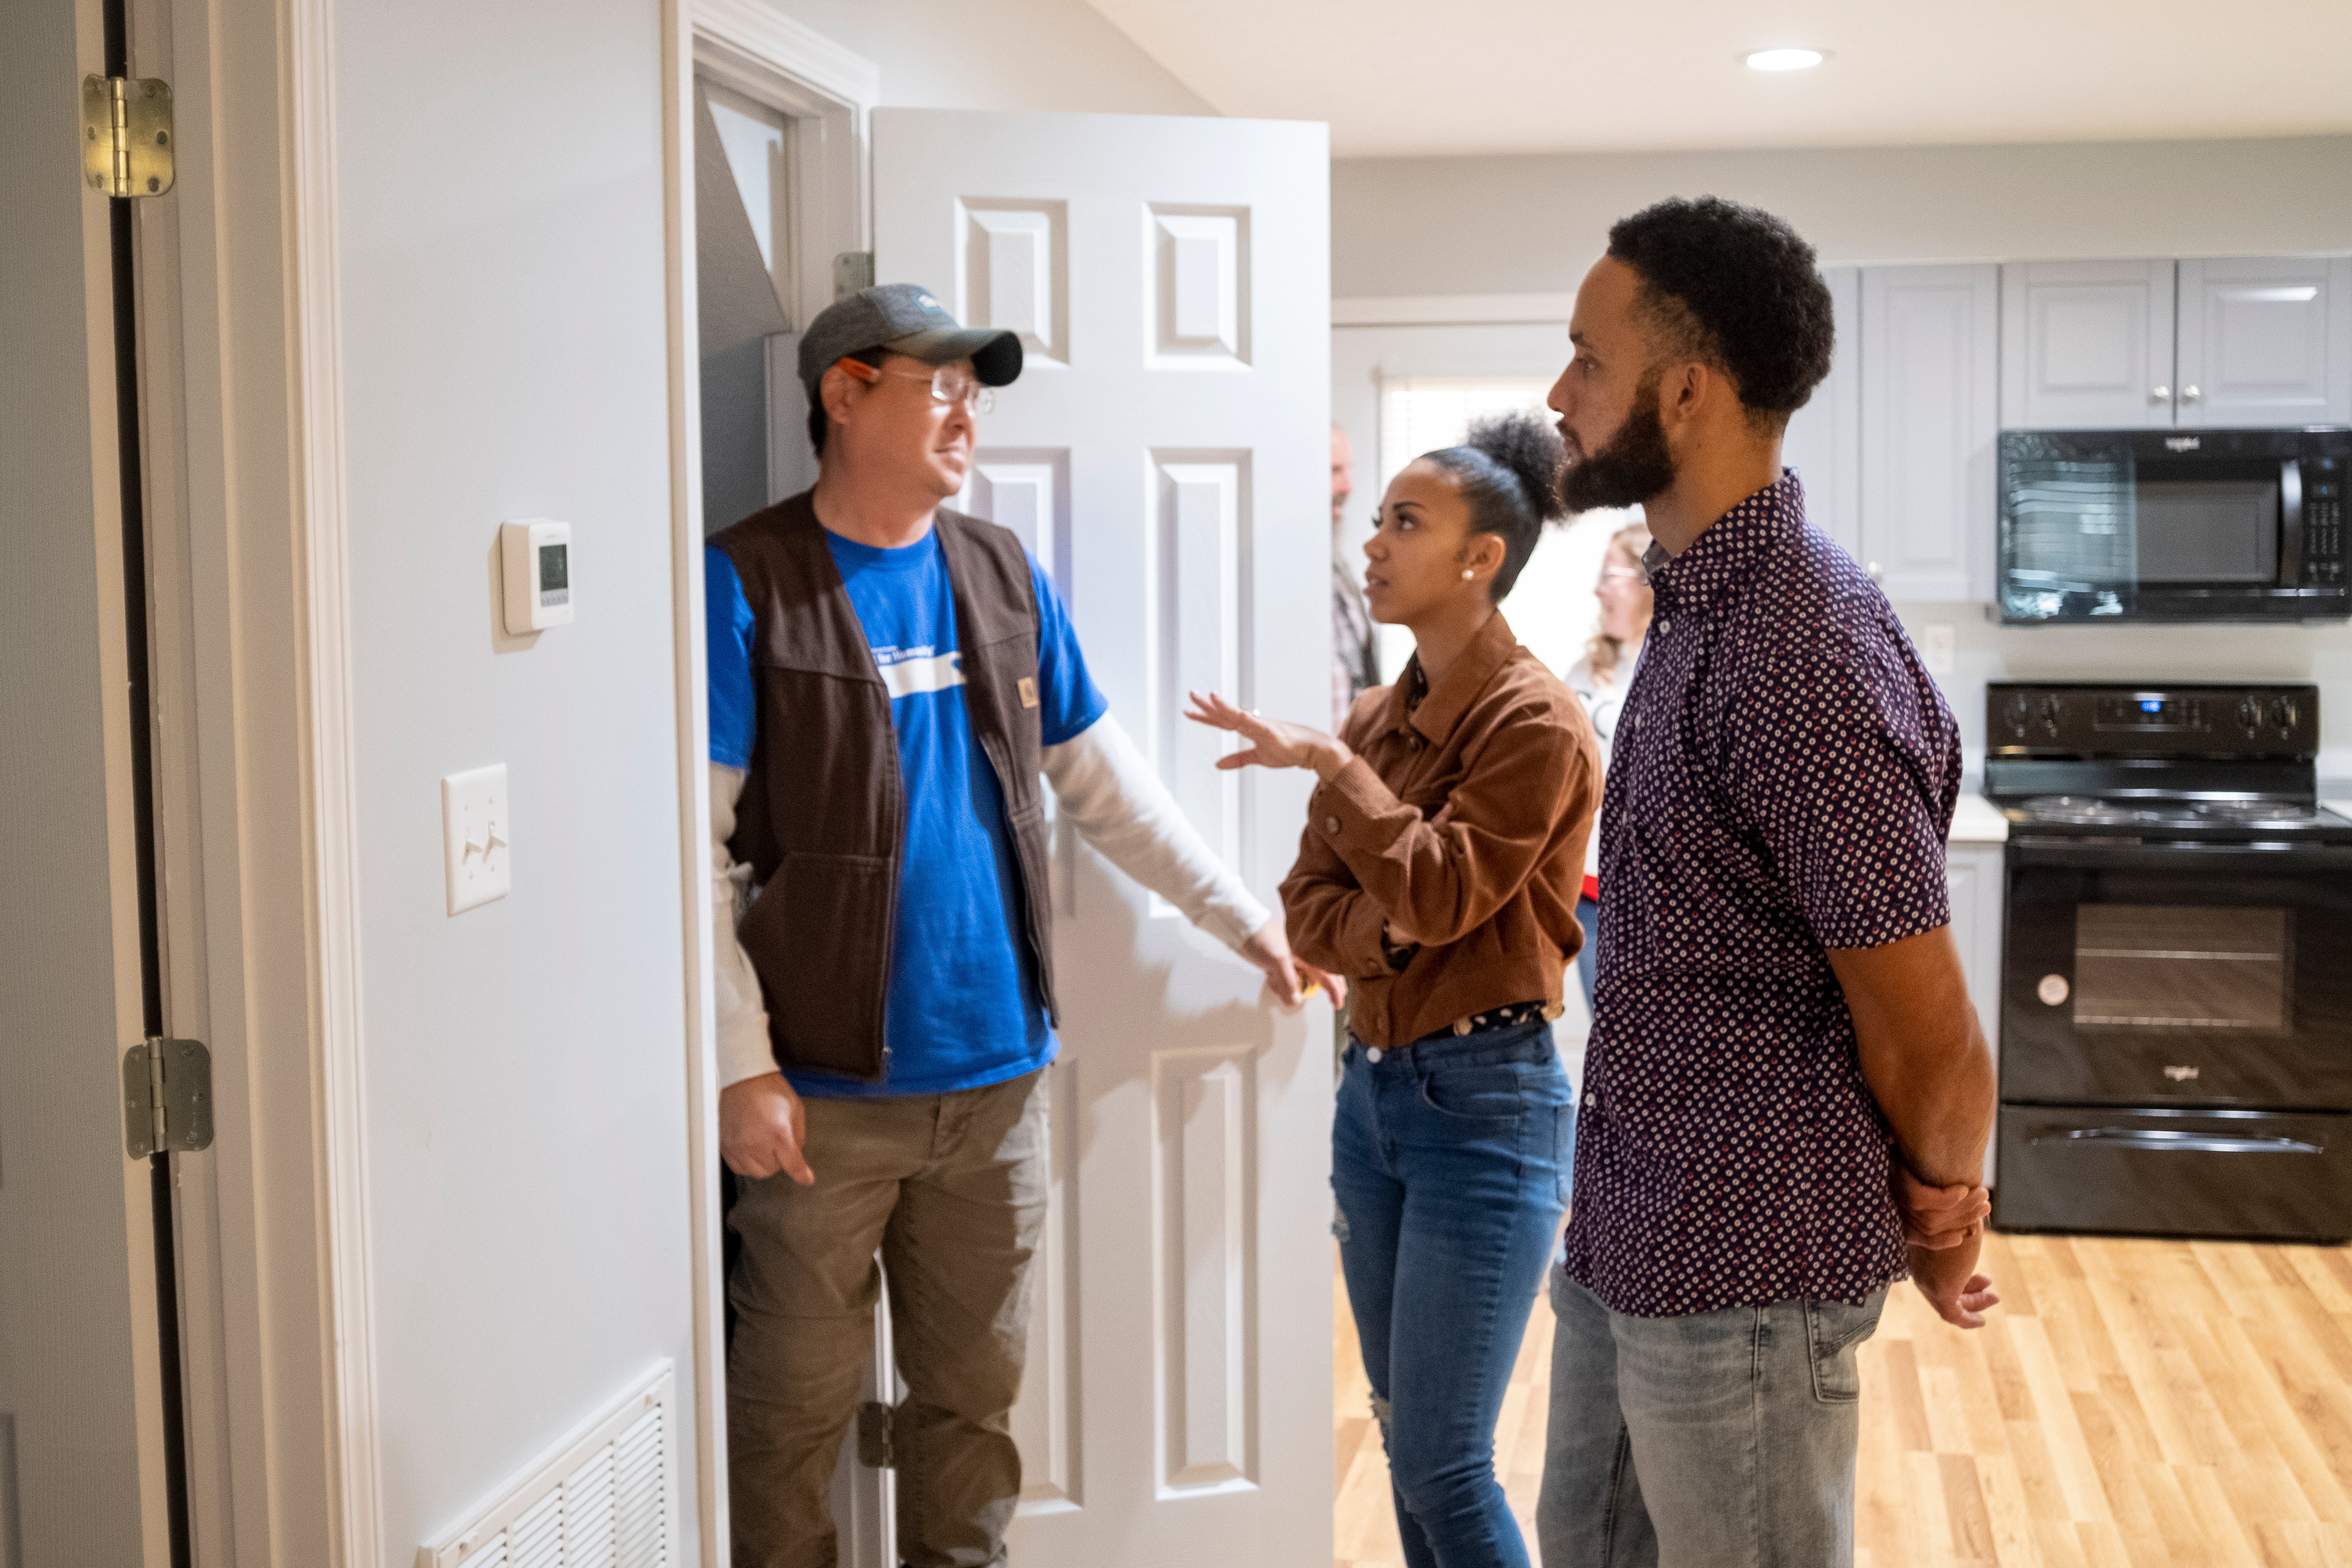 Chris and Kayla speaking with a Habitat worker inside their new home.